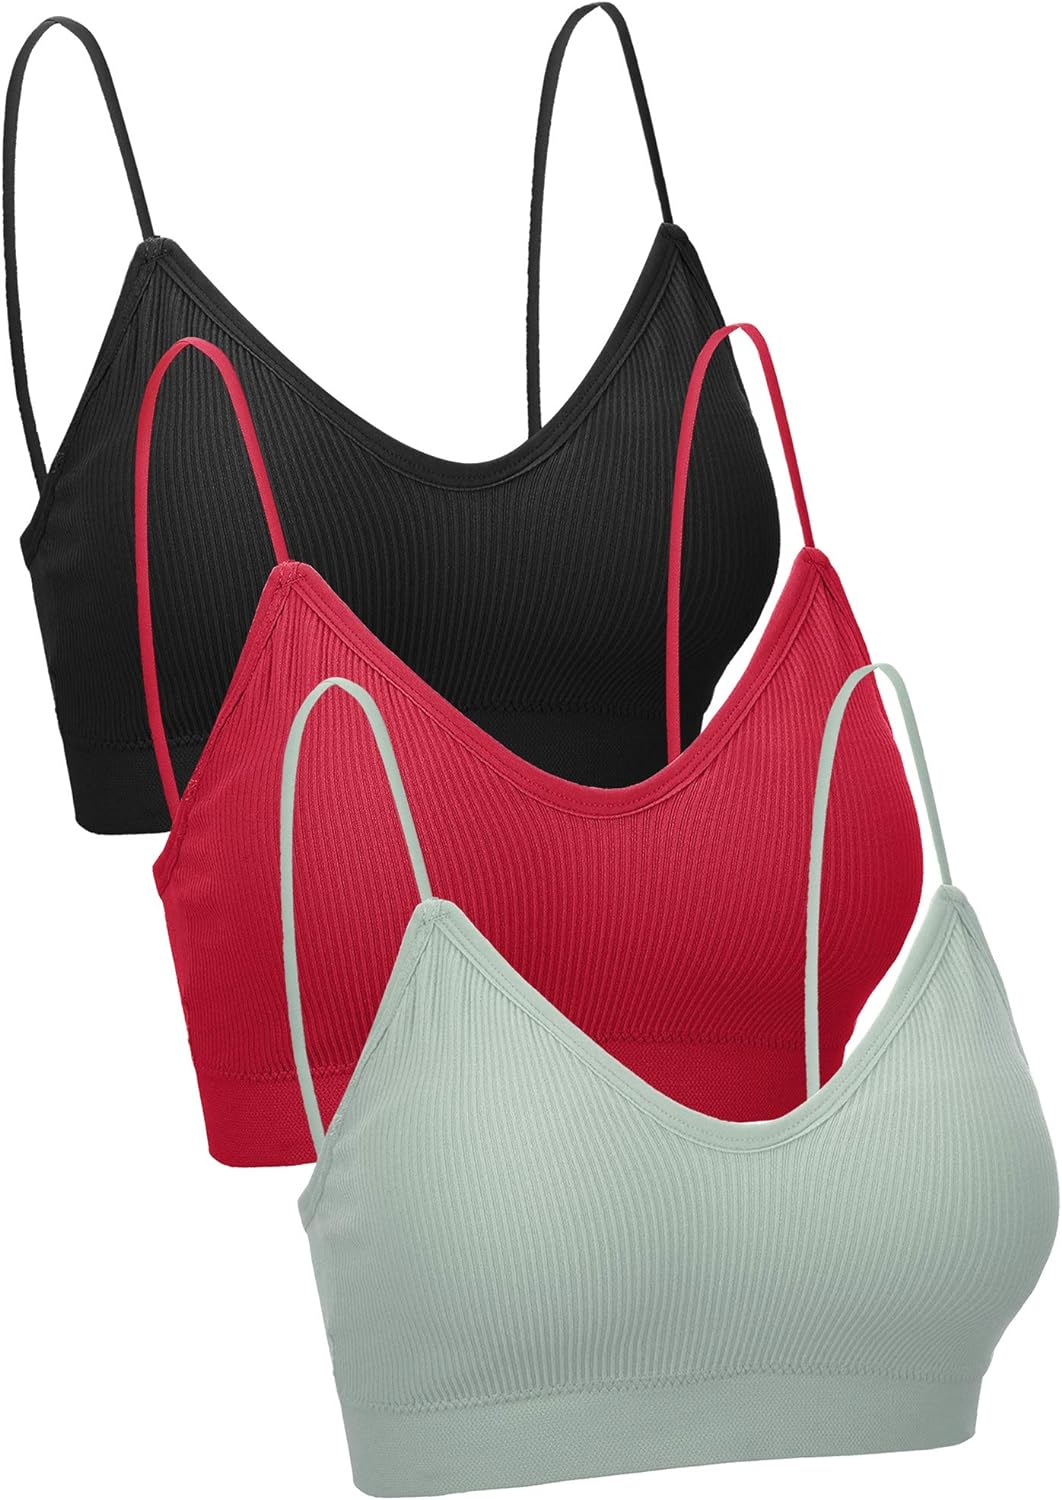 3 Pieces V Neck Women Bra Seamless Padded Camisole Bandeau Tube Bra with Elastic Straps